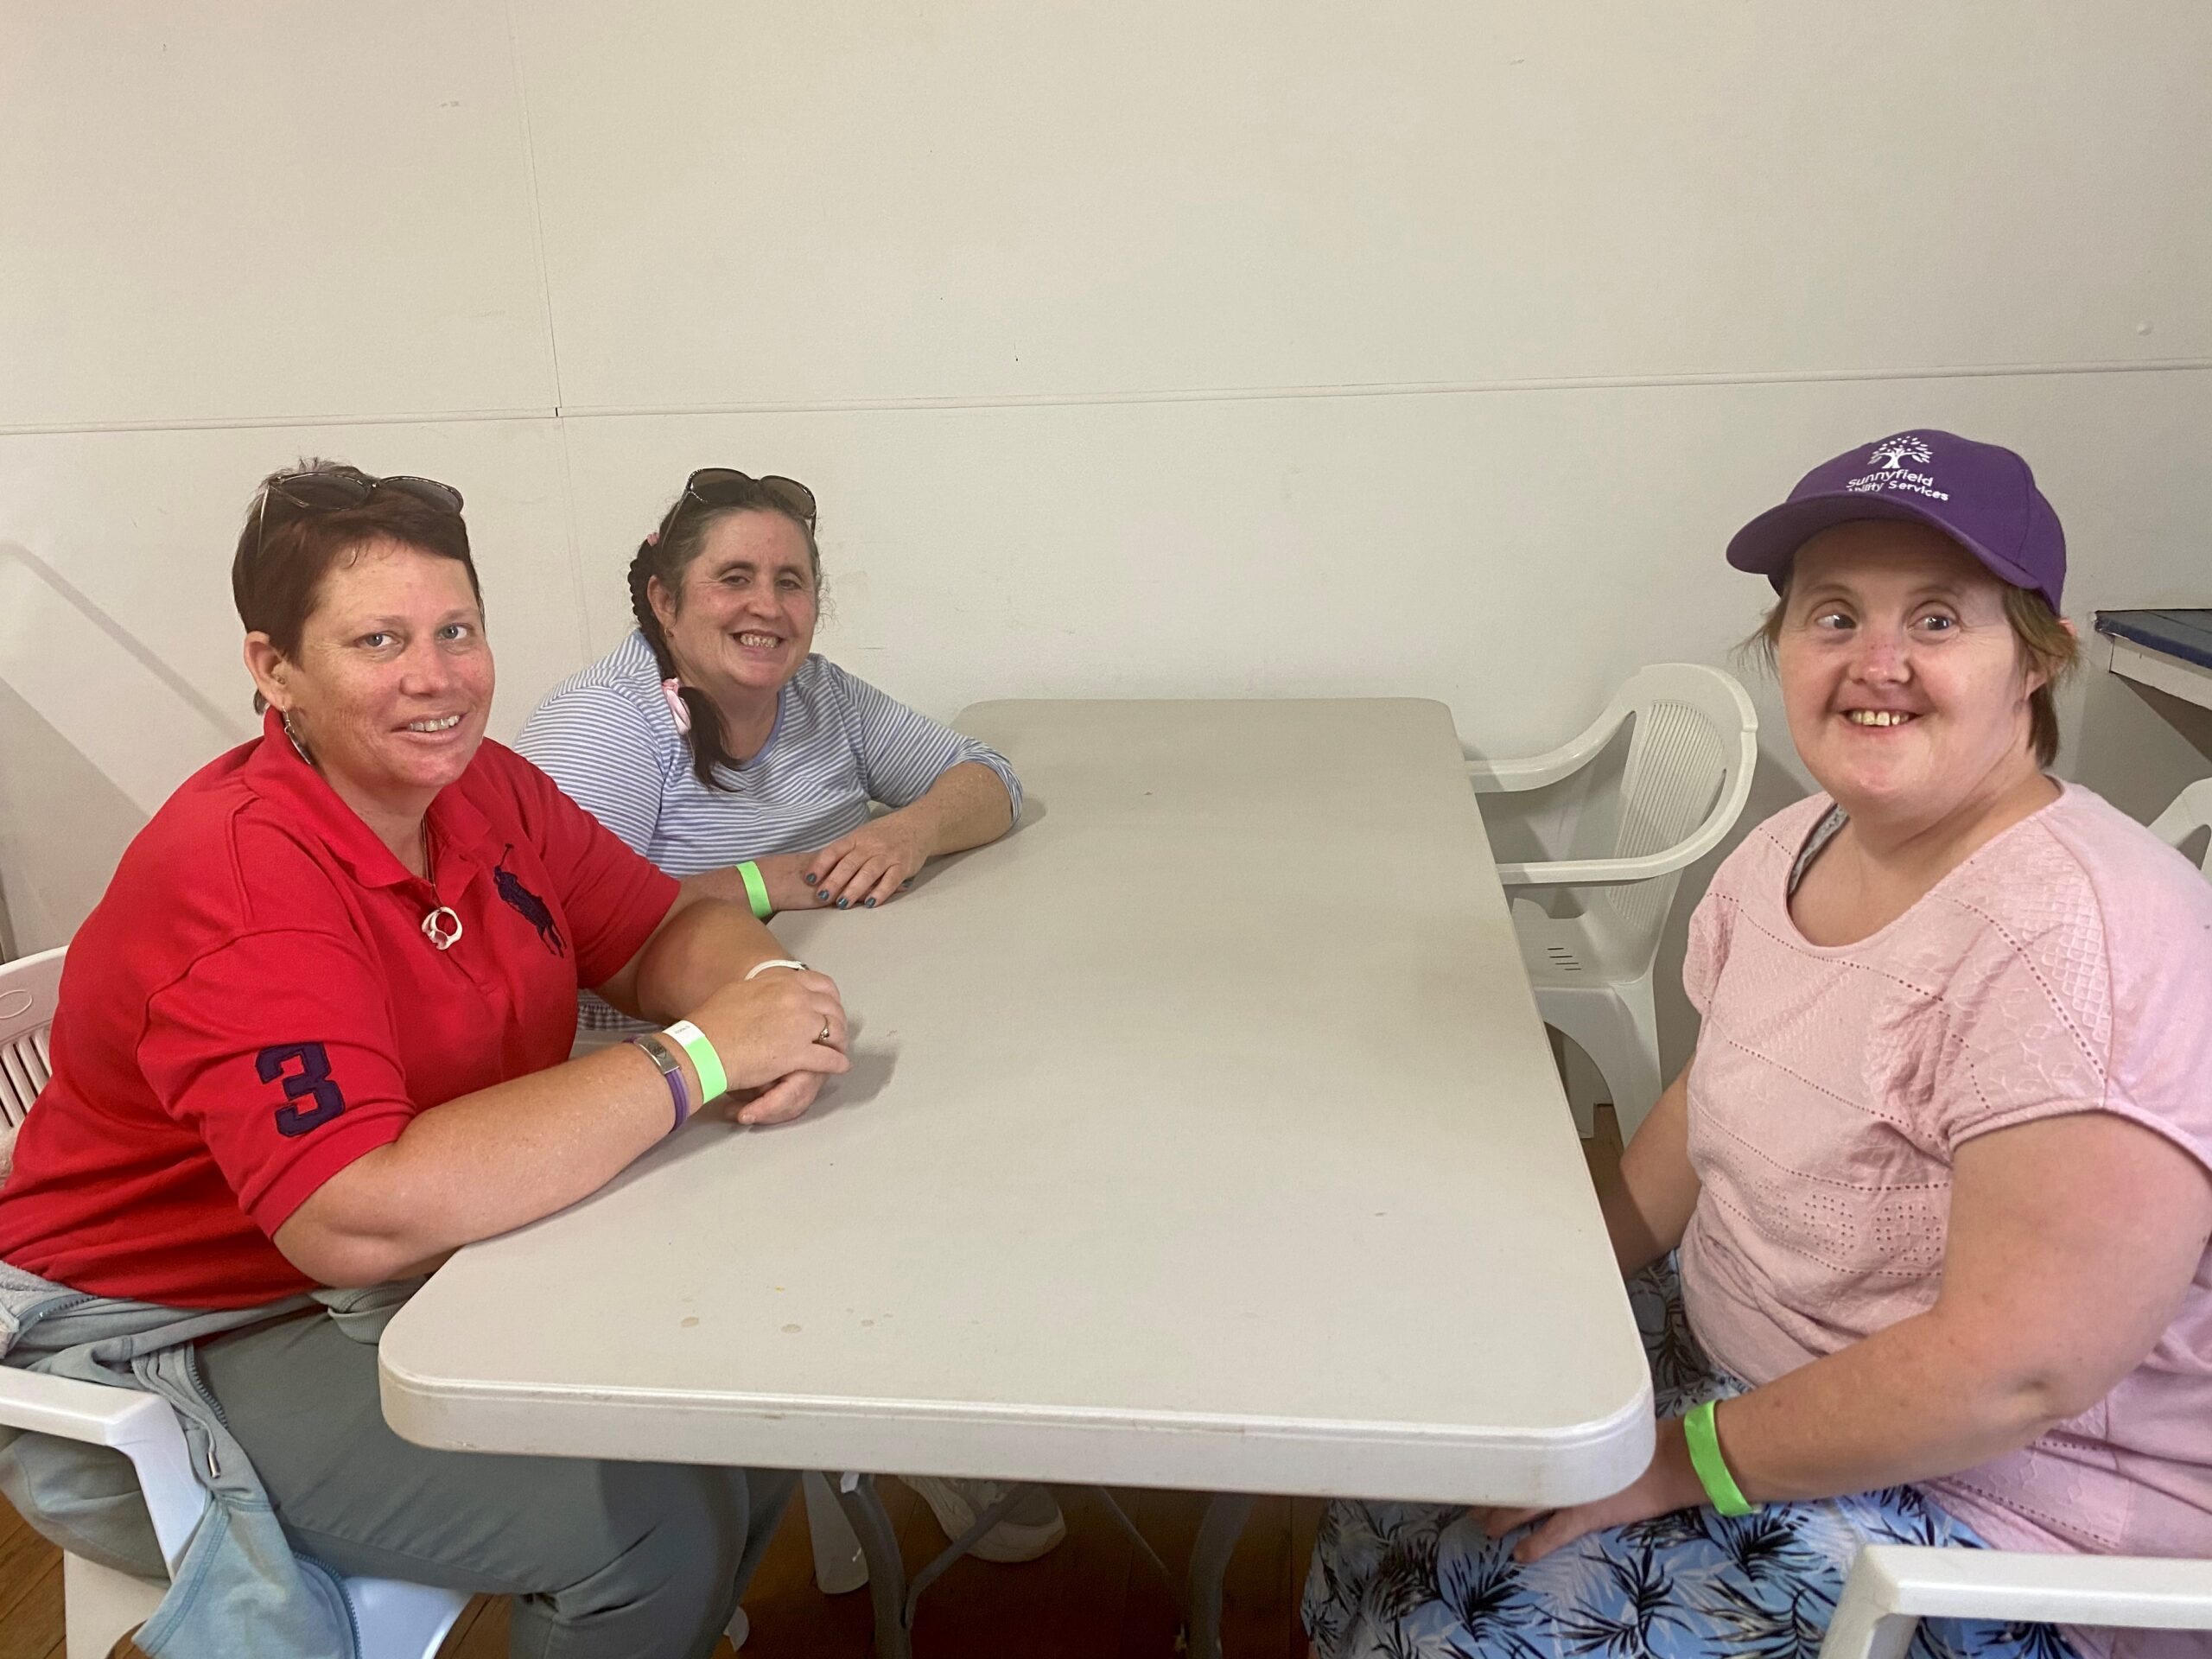 Enjoying a delicious lunch in the dining hall were Tracy Fing, Therese Walton and Kim Scaysbrook.